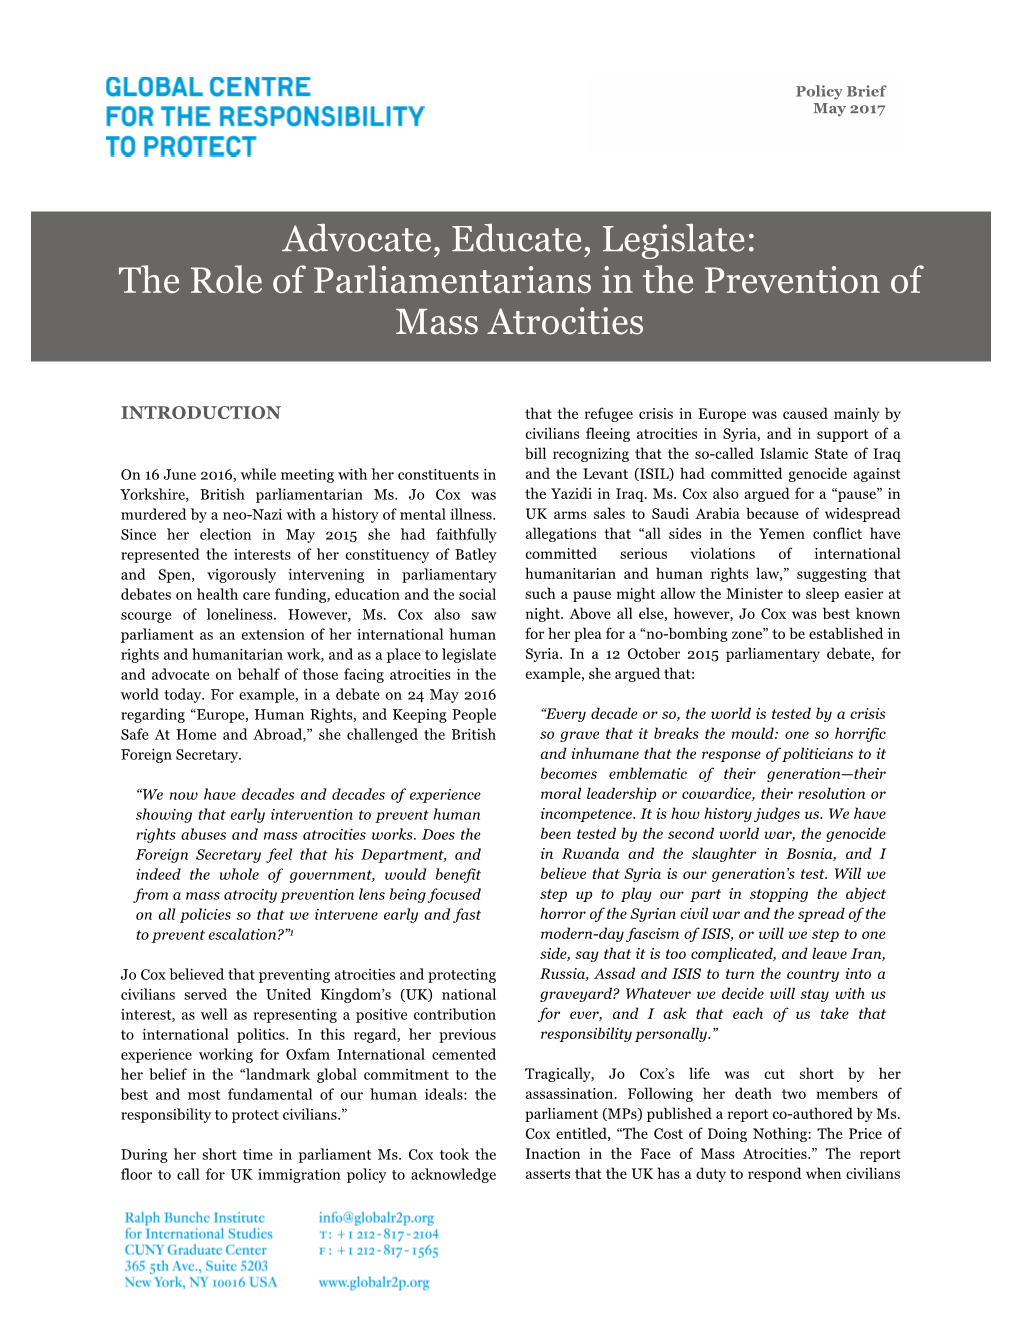 The Role of Parliamentarians in the Prevention of Mass Atrocities